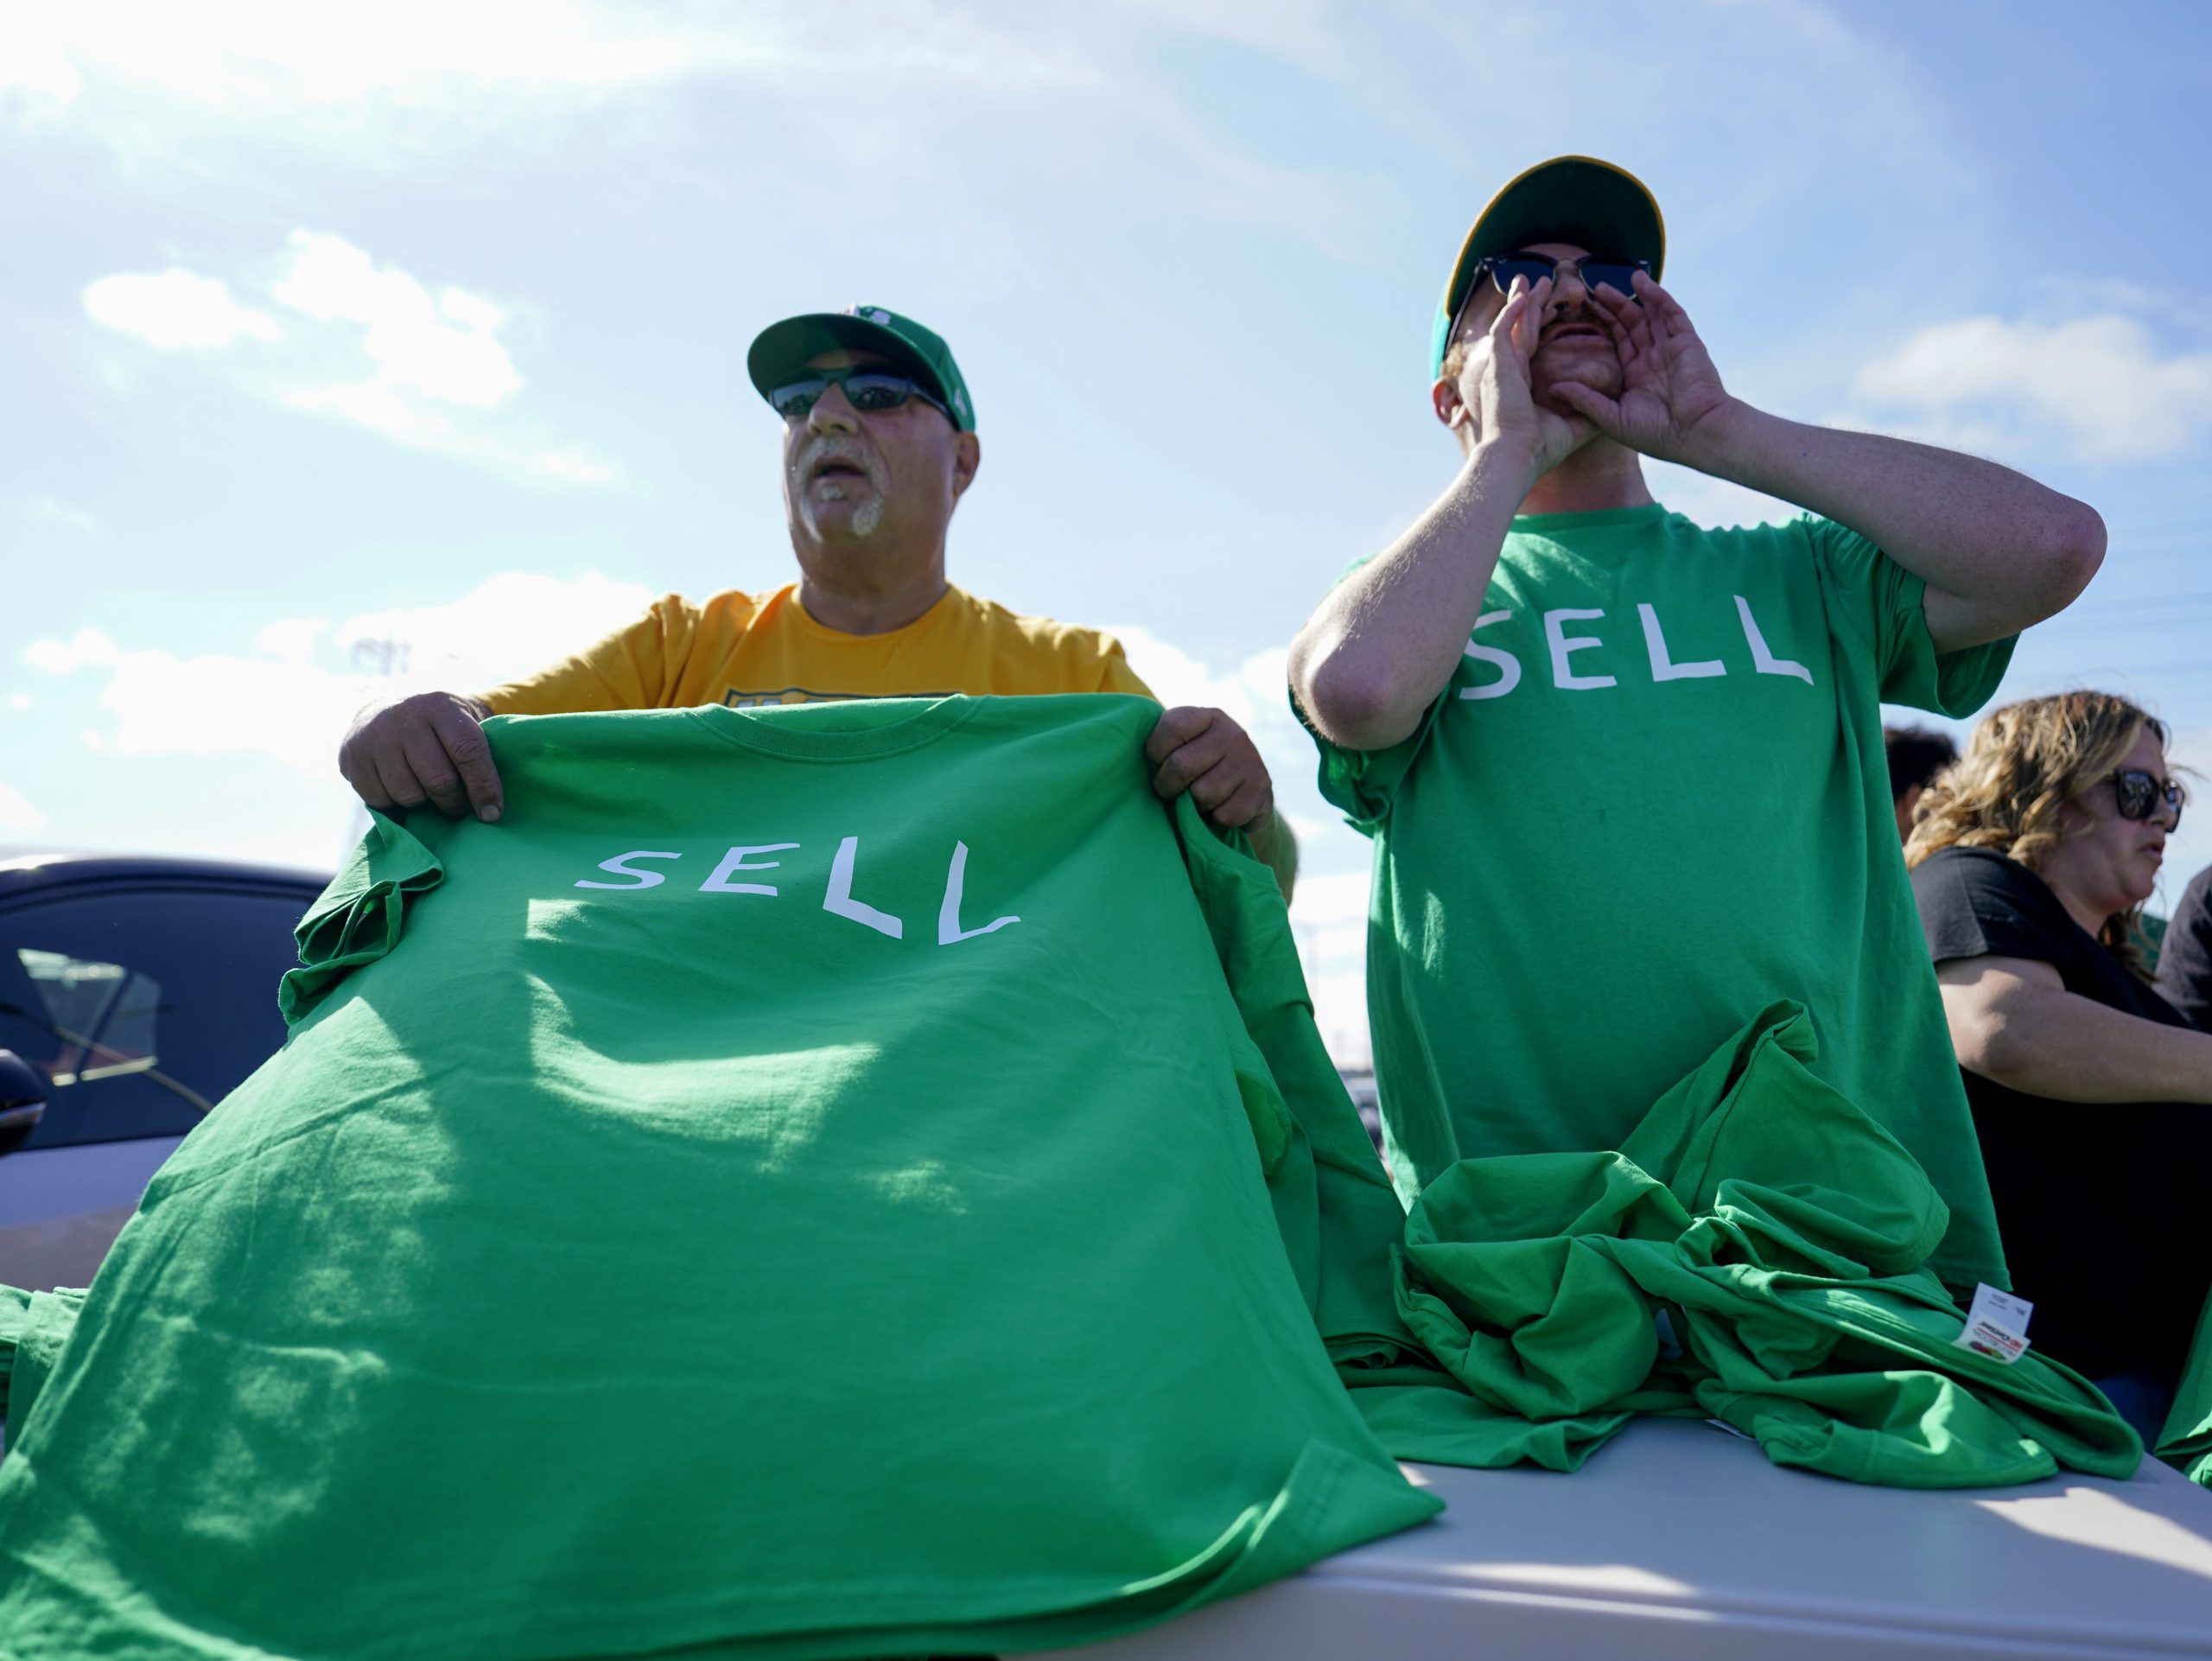 A's fans come out en masse to demand owner sell beleaguered team